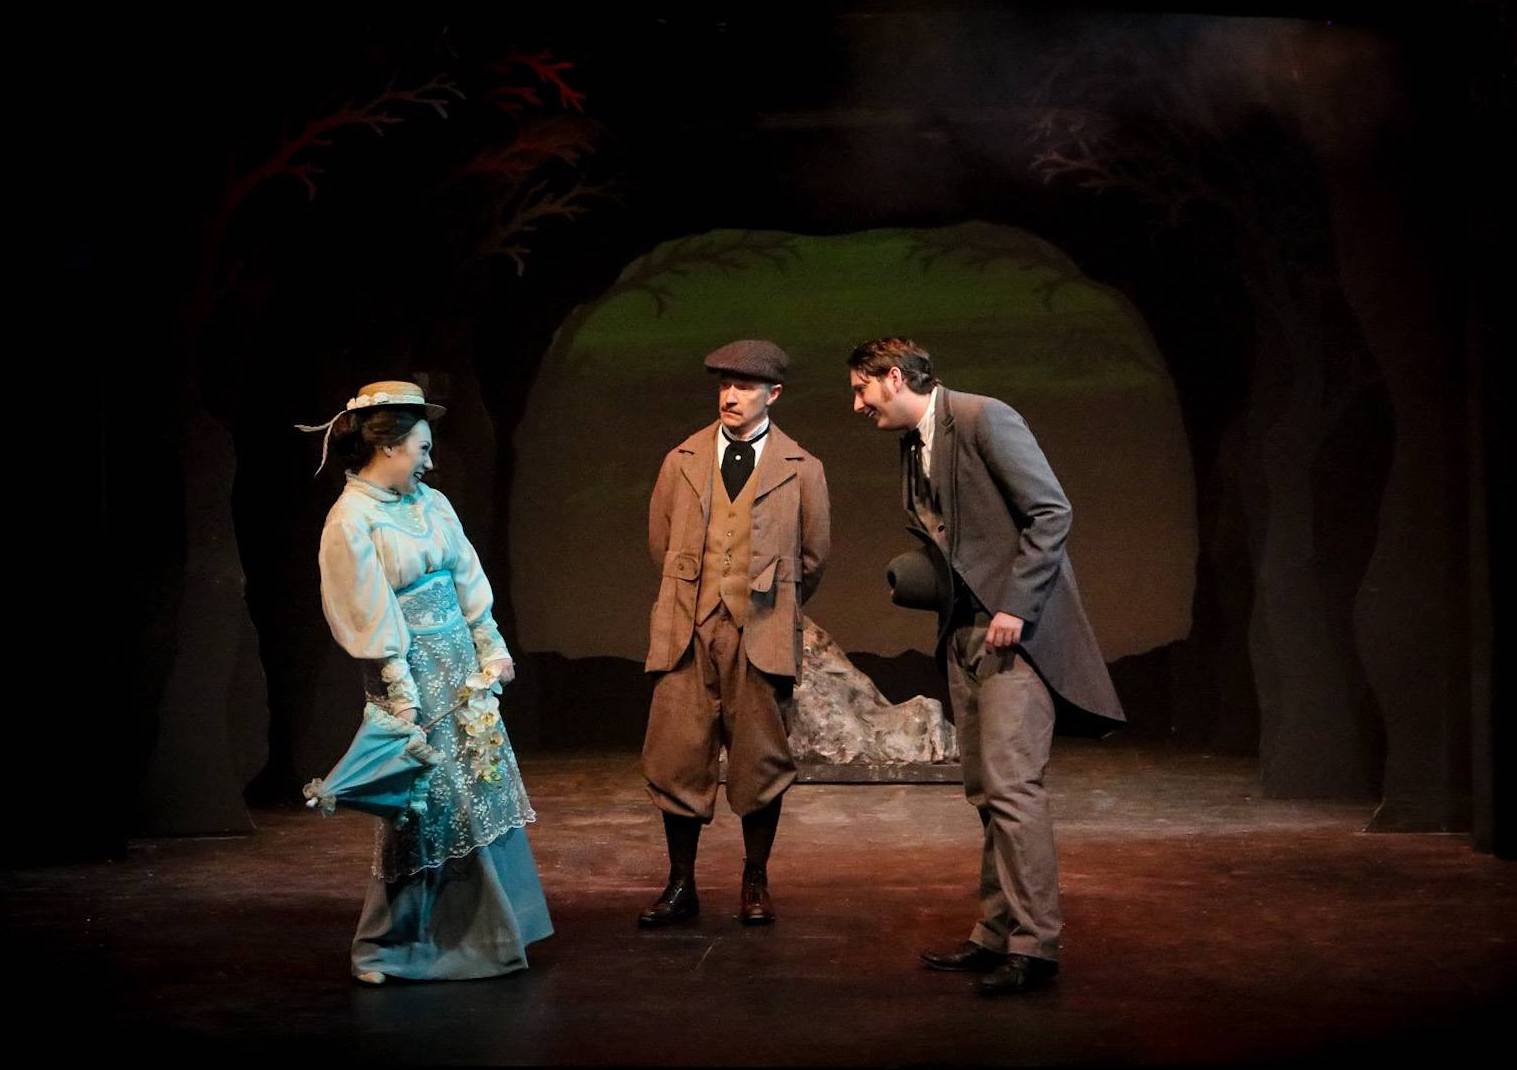 As Dr. Watson, with Mia Marie Mekjian as Miss Stapleton and Toby Tropper as Sir Henry Baskerville in KEN LUDWIG'S BASKERVILLE: A SHERLOCK HOLMES MYSTERY at Sierra Repertory Theatre. Photo by Jerry Lee.